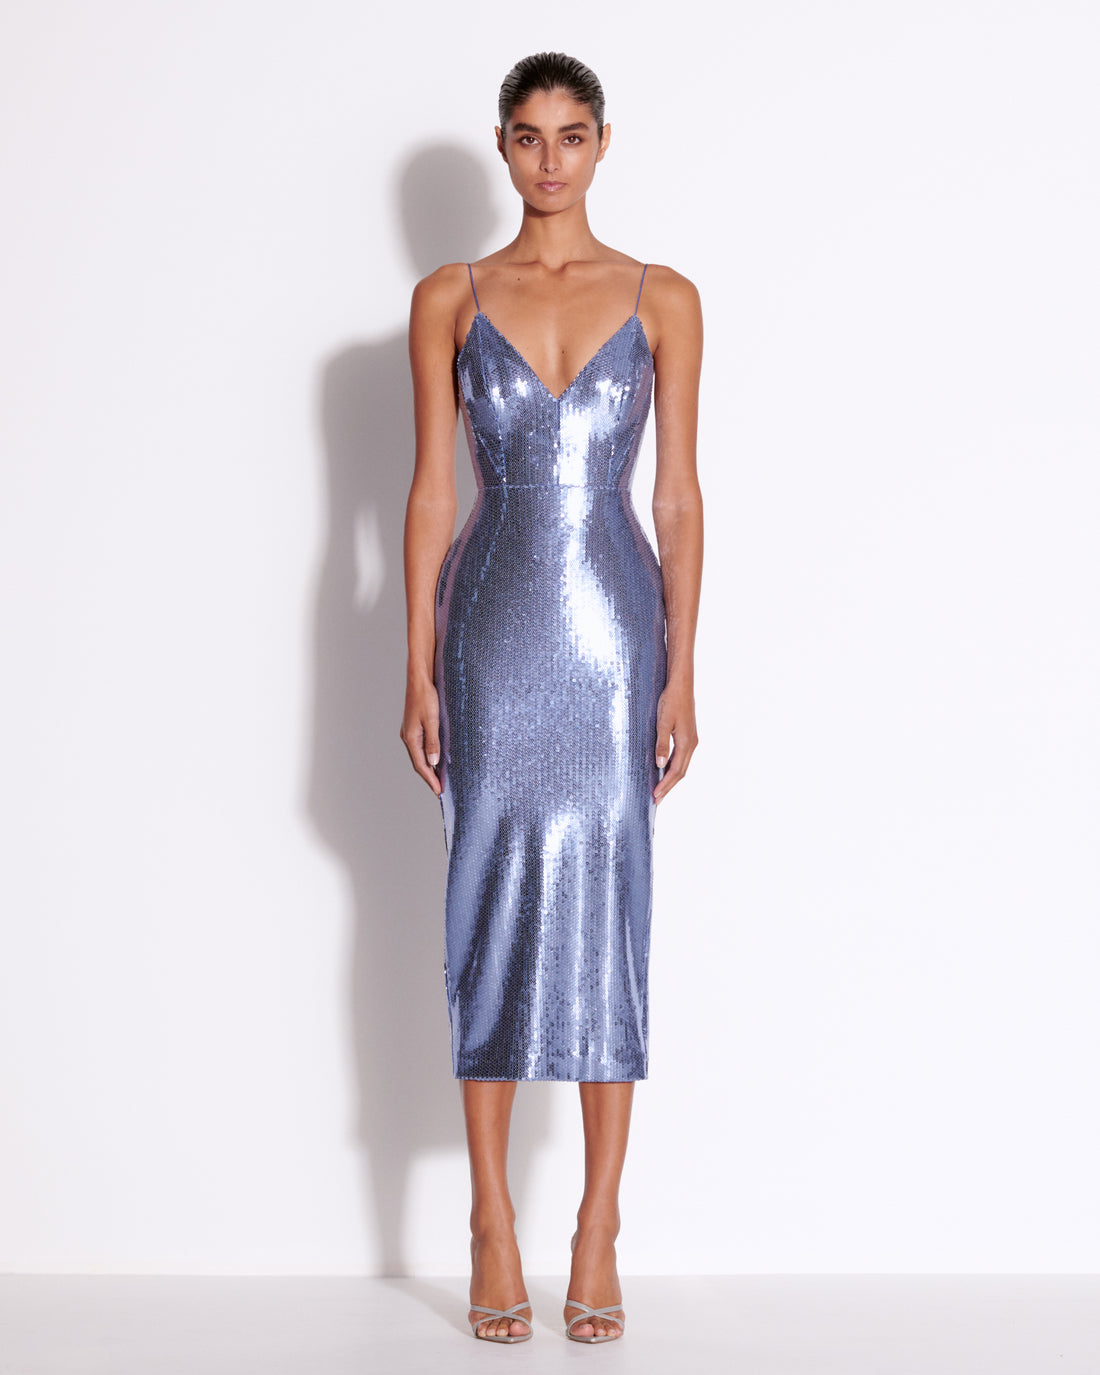 Alex Perry Long Sleeve Silver Sequin Dalston Lady Dress in Metallic